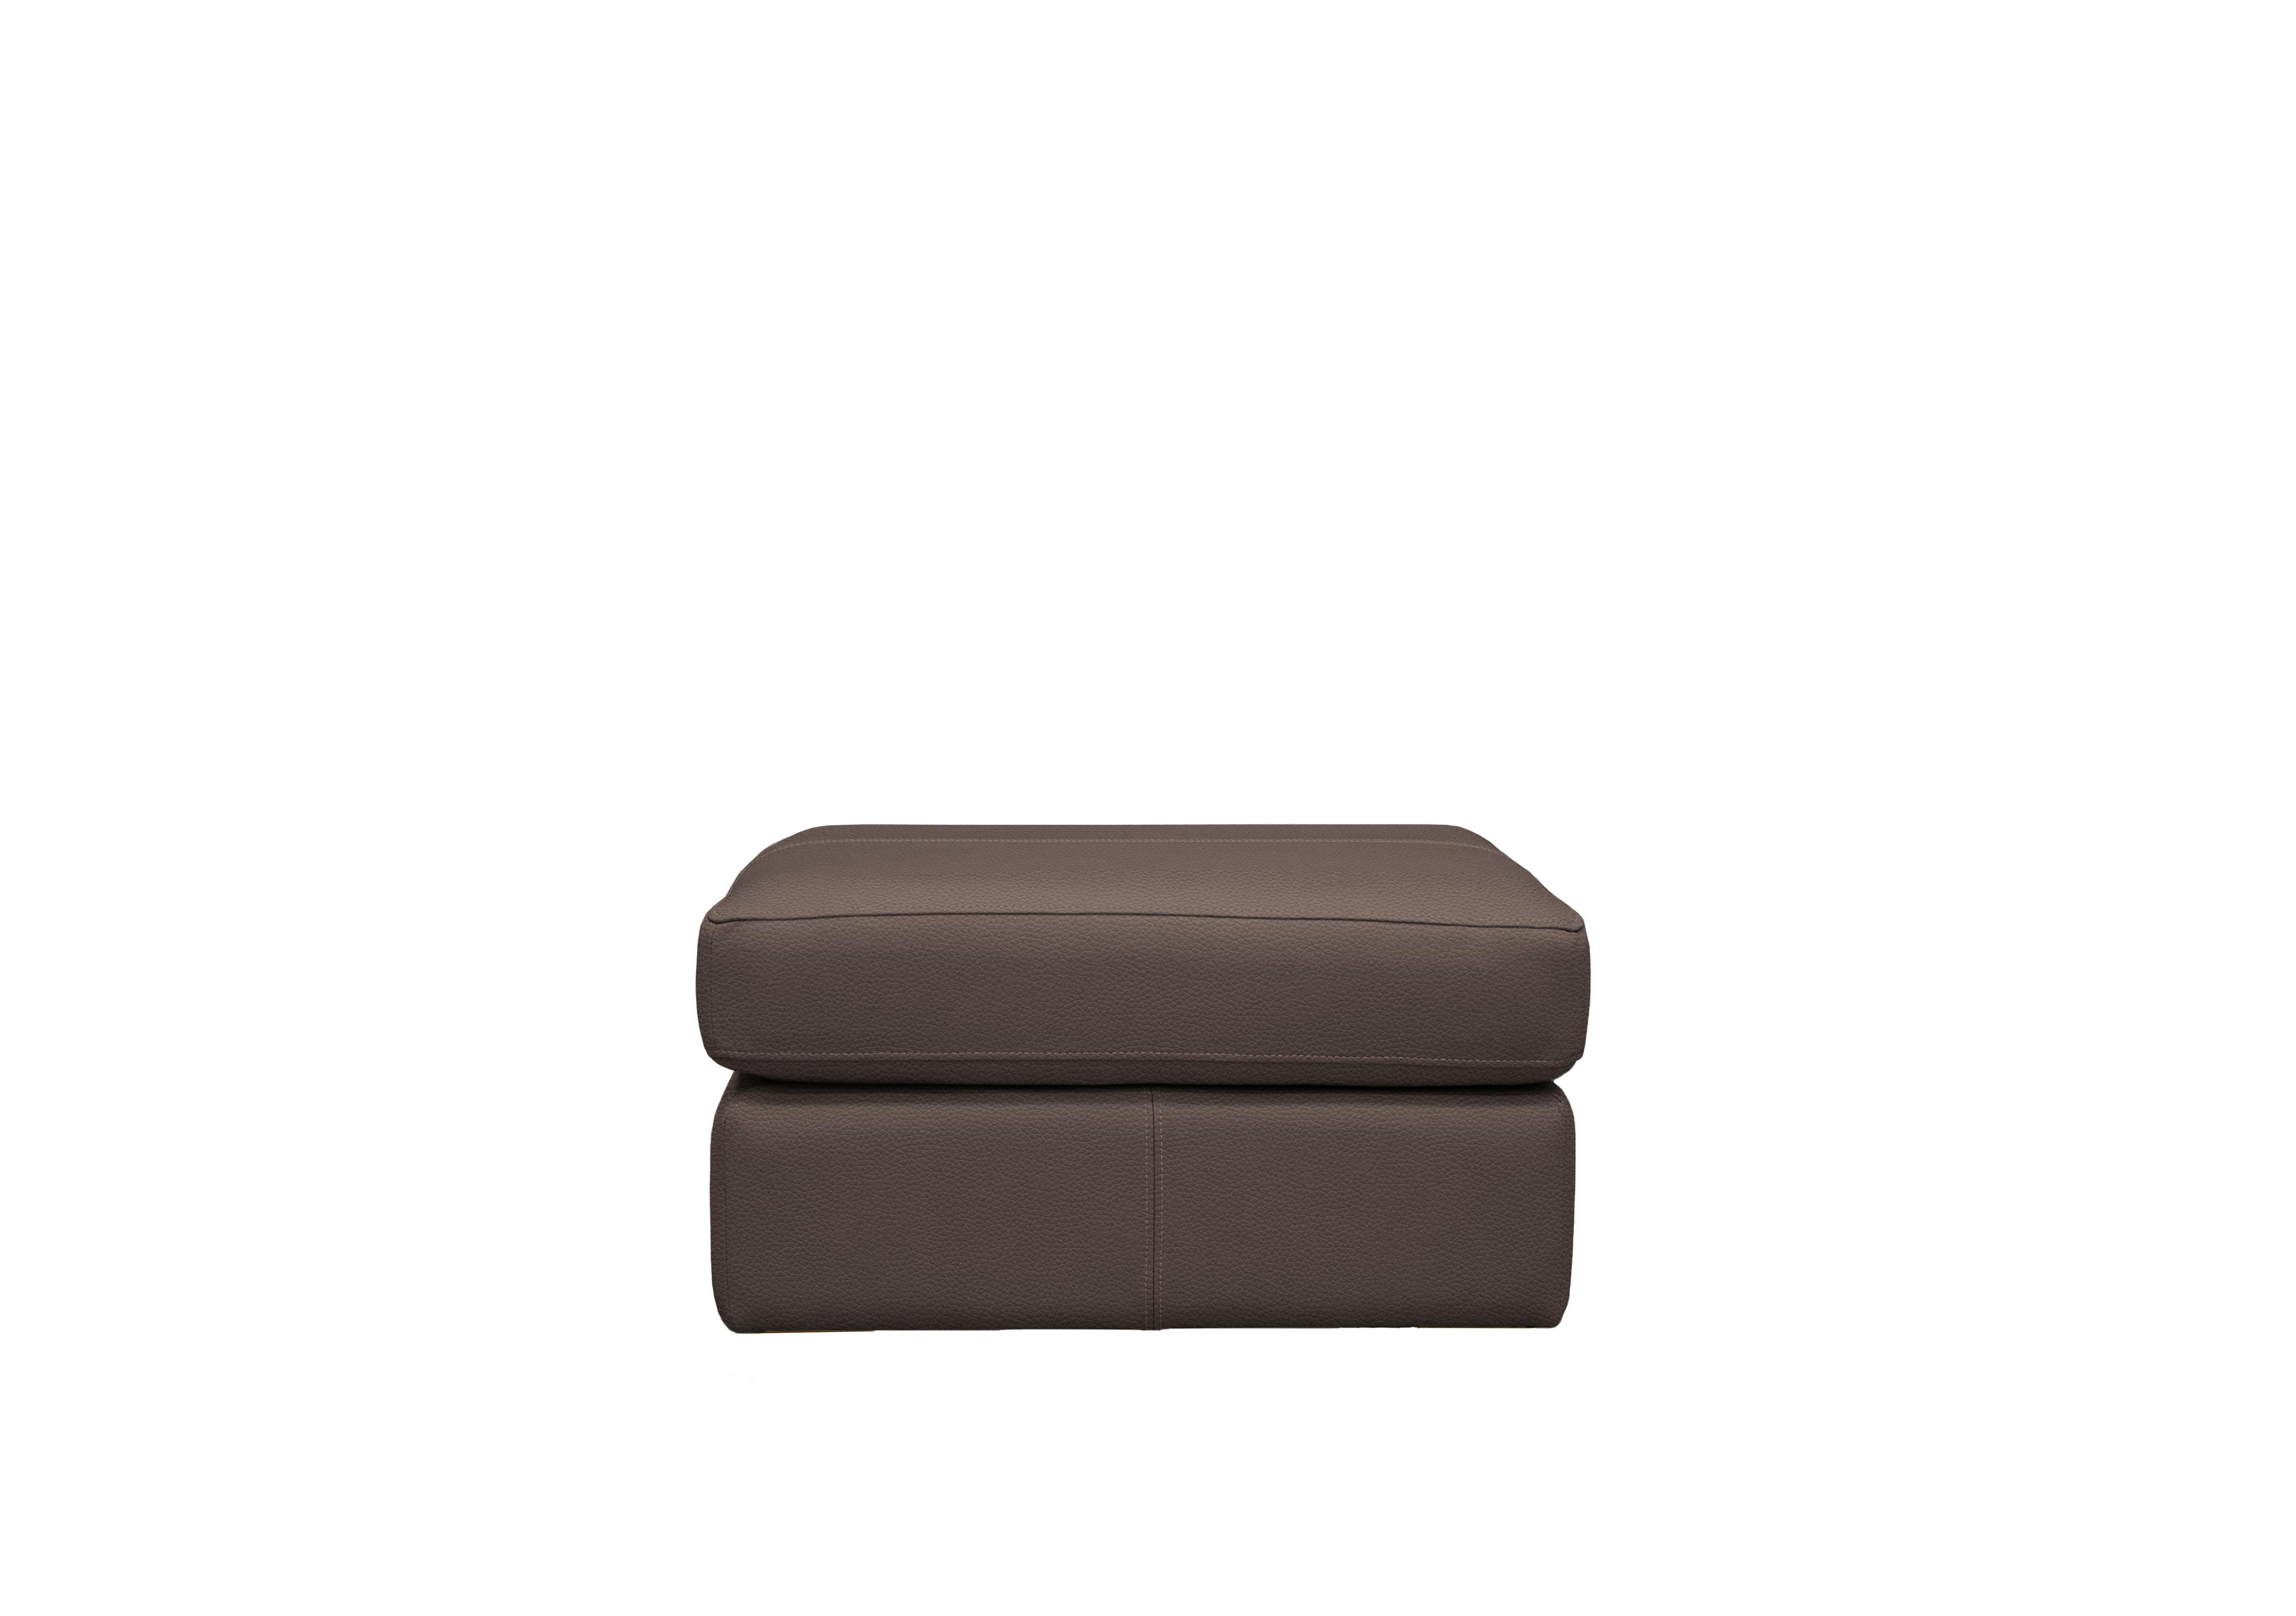 Seattle Leather Storage Footstool in H003 Oxford Chocolate on Furniture Village